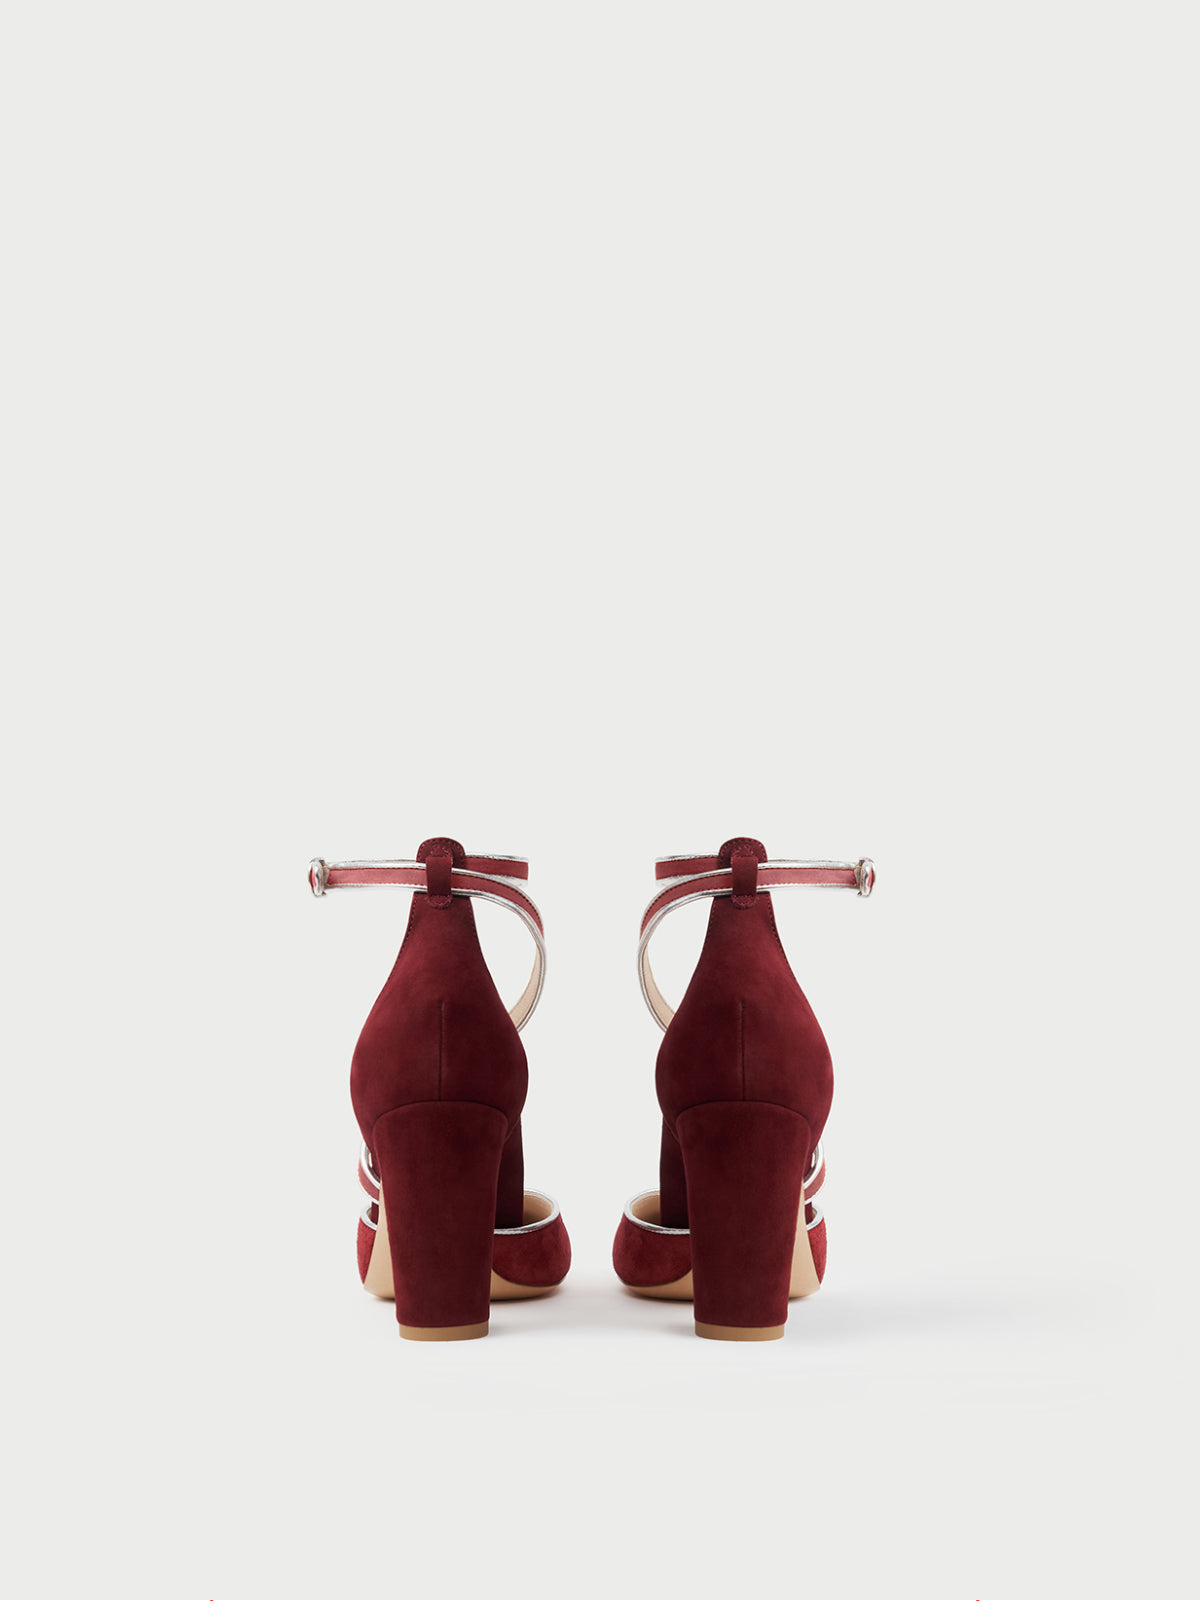 Mavette Pump Nola D'Orsay suede burgundy pumps made in Italy